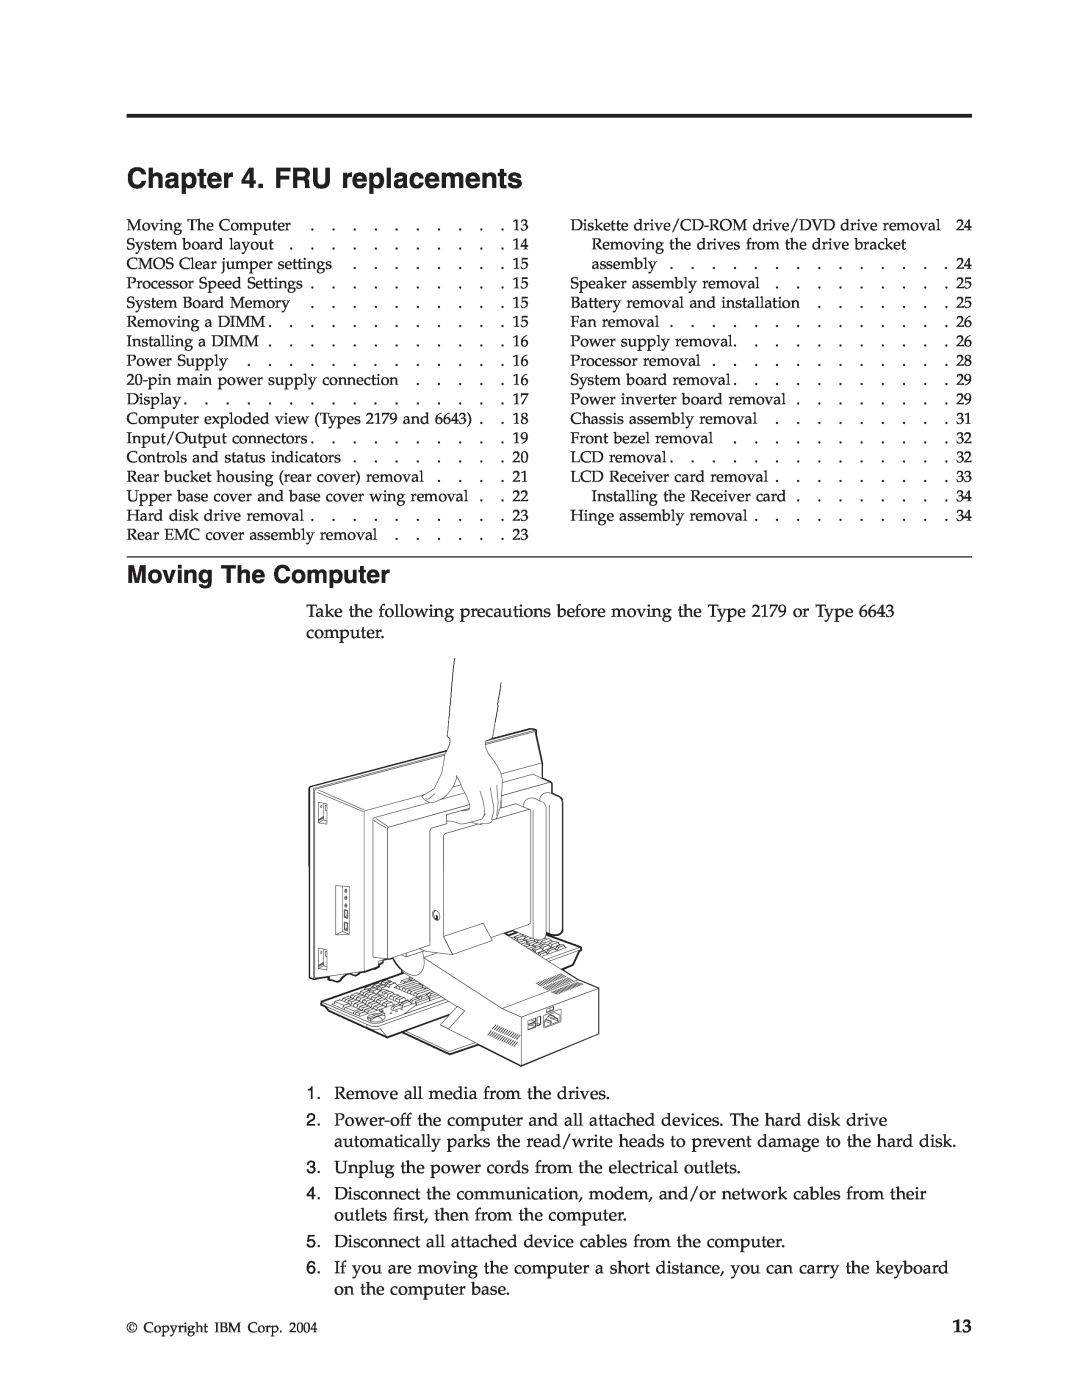 IBM 2179, 6643 manual FRU replacements, Moving The Computer 